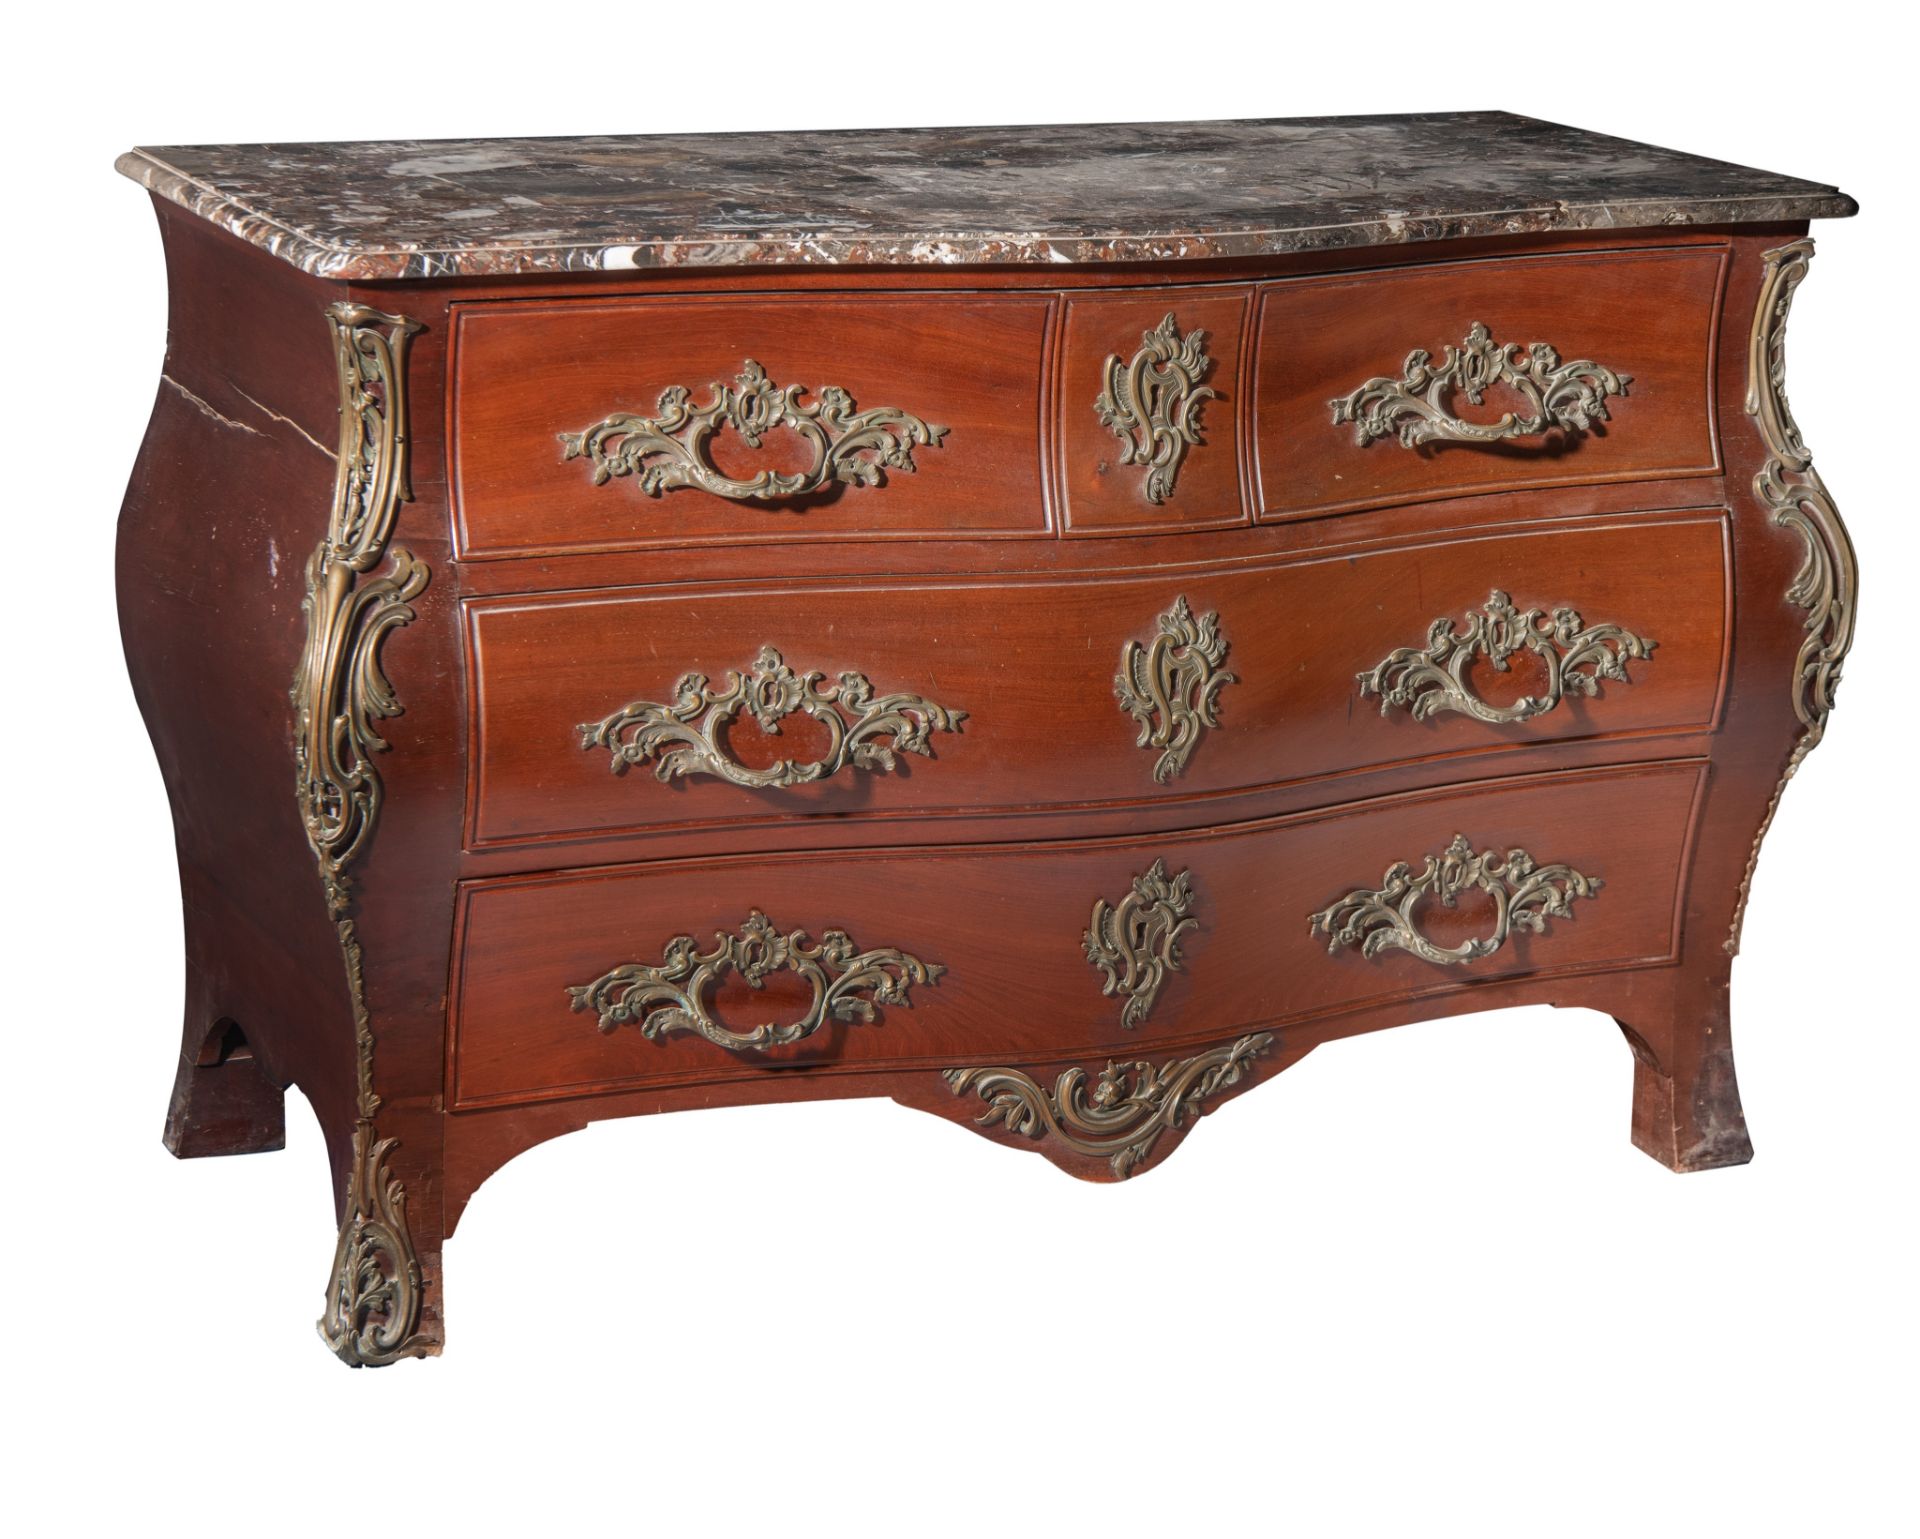 A Rococo style commode, 19thC, H 84 - W 130 - D 62 cm